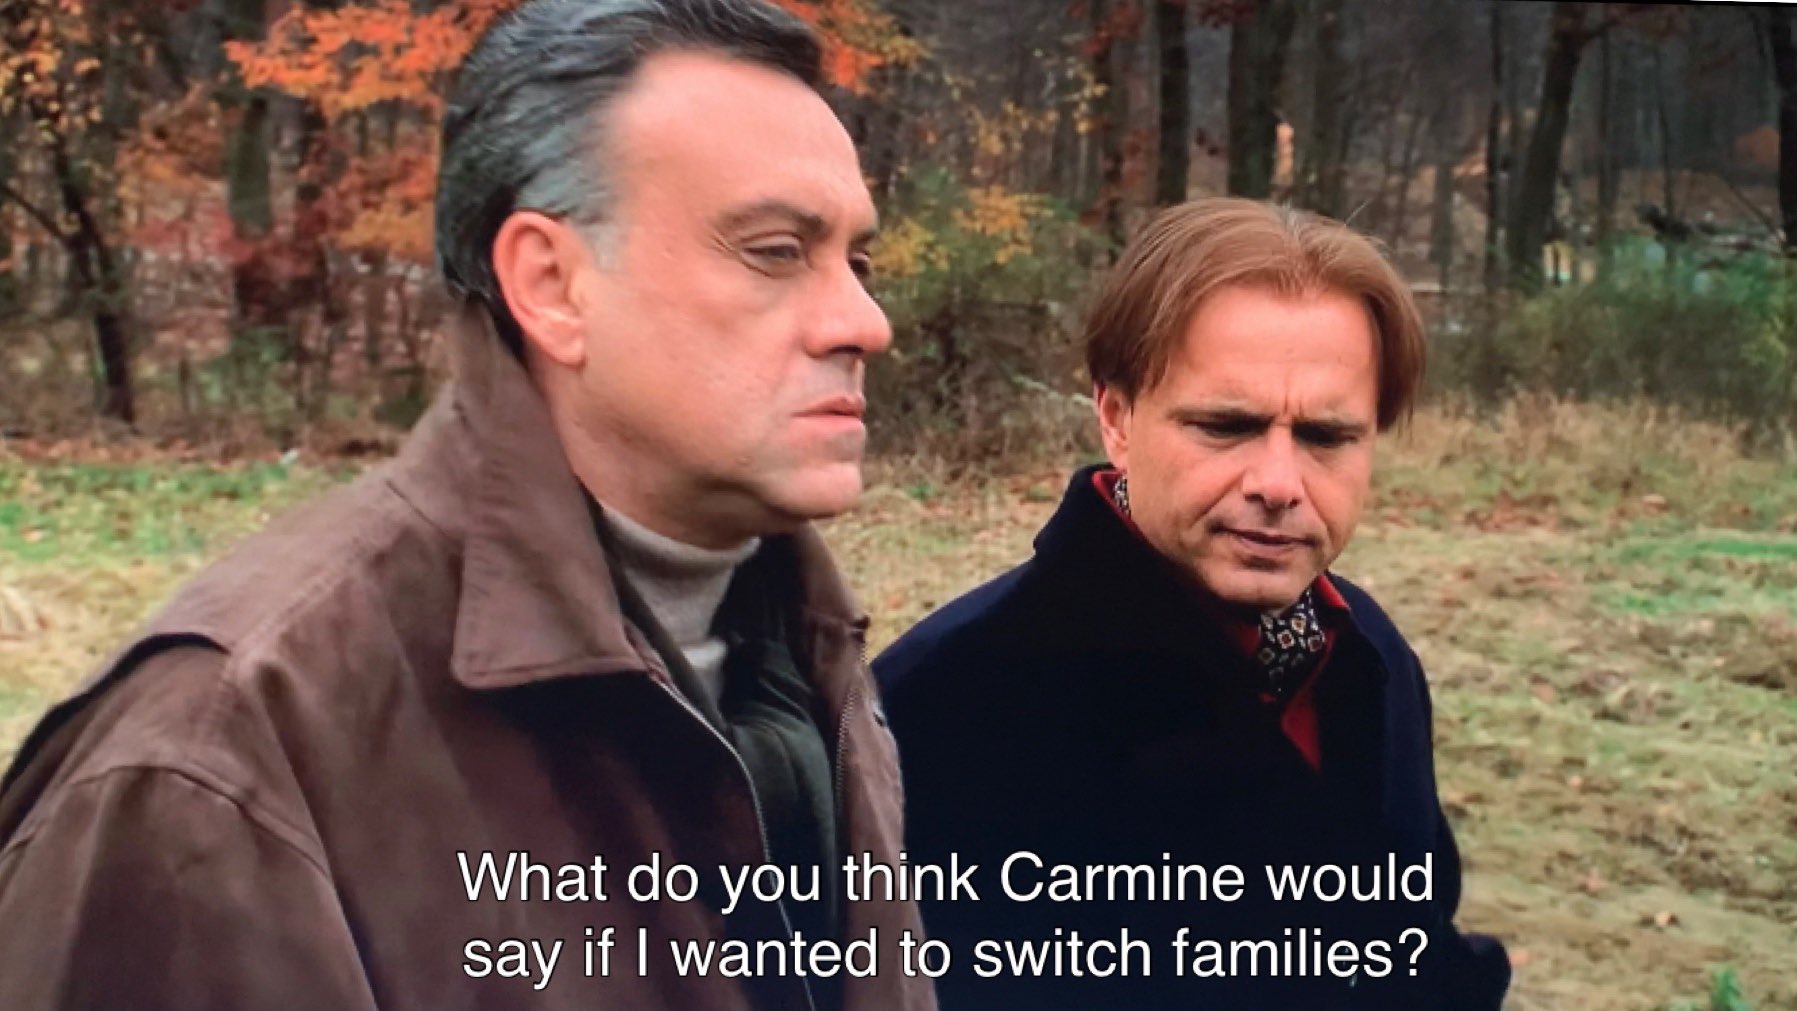 ralph cifaretto is walking and talking to johnny sack about switching families.